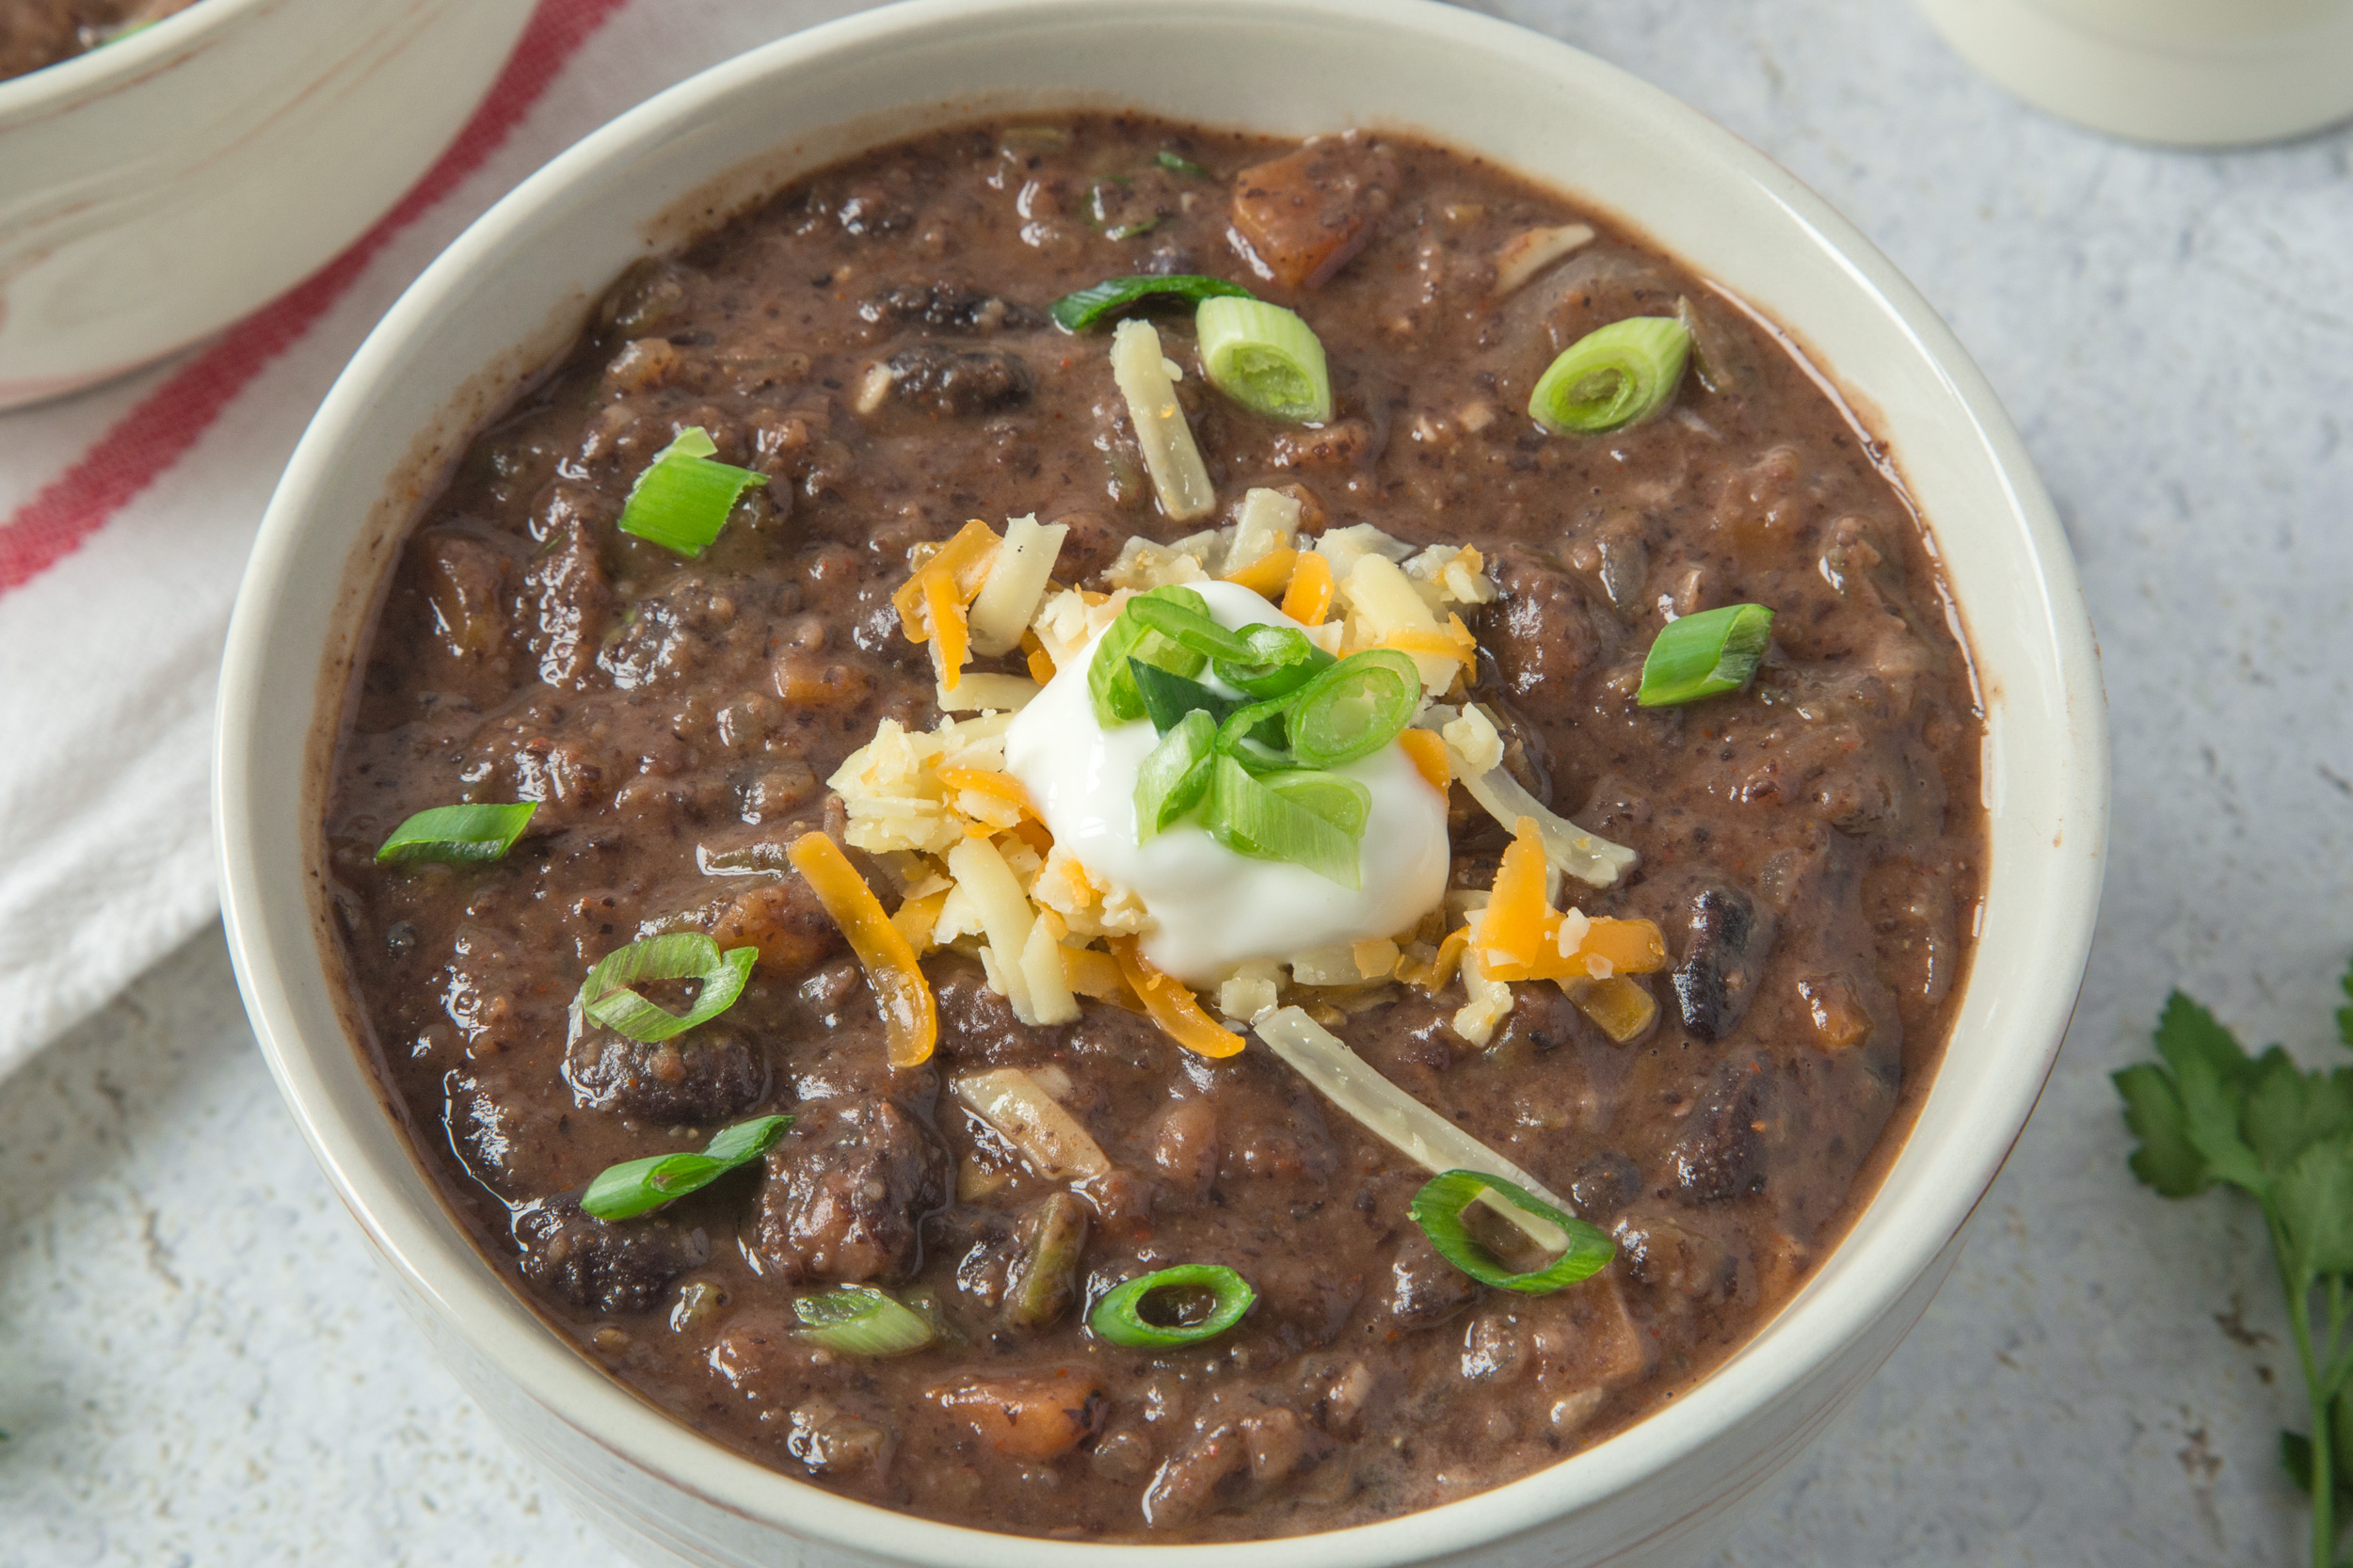 Tsr Version Of T.G.I. Friday’S Black Bean Soup By Todd Wilbur